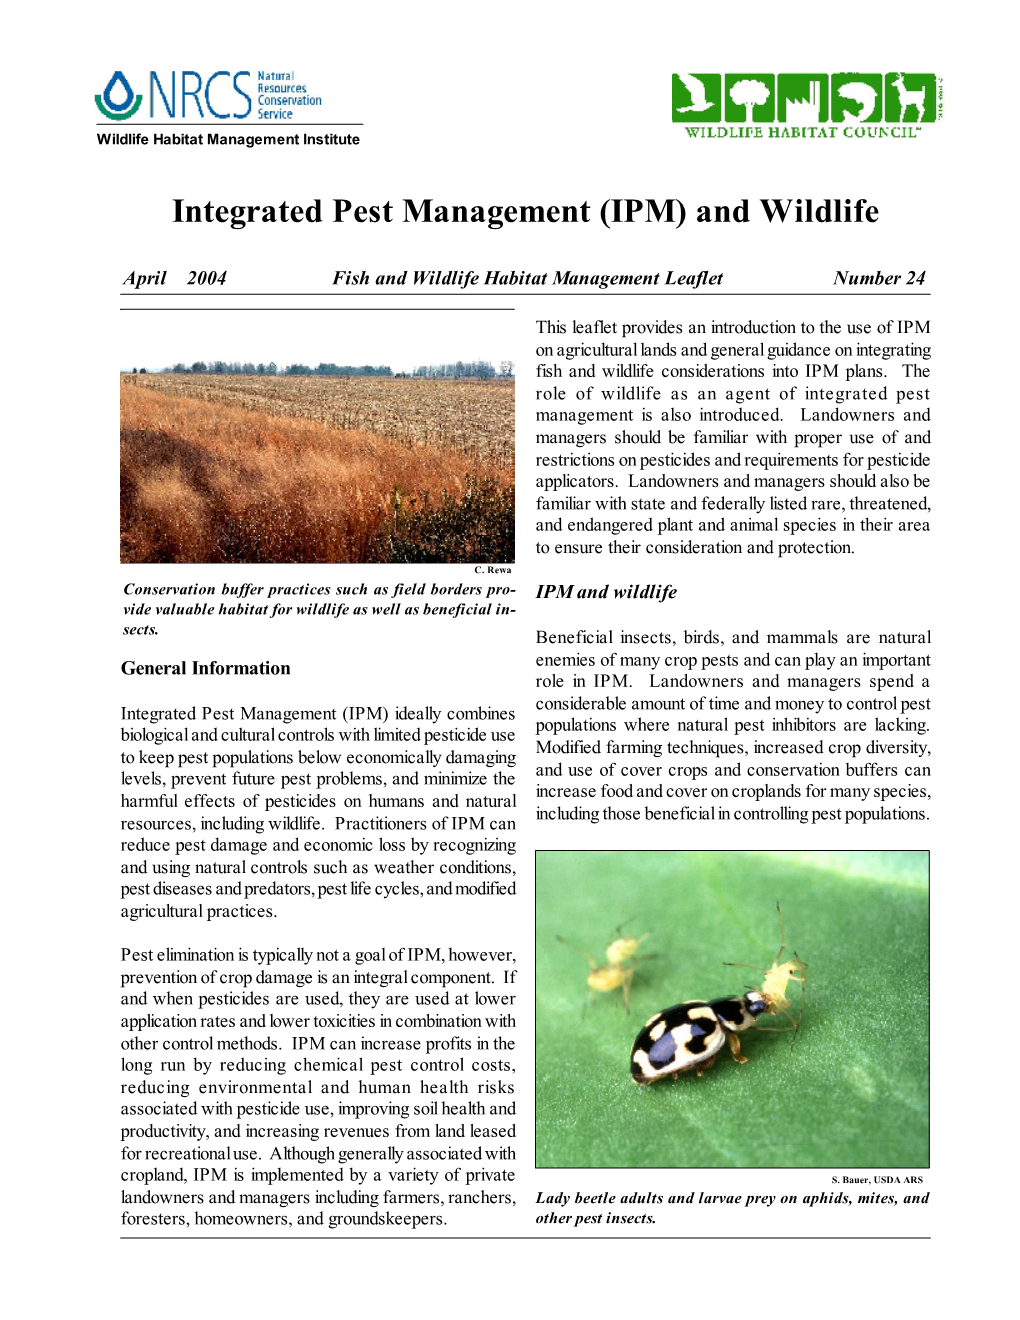 Integrated Pest Management (IPM) and Wildlife